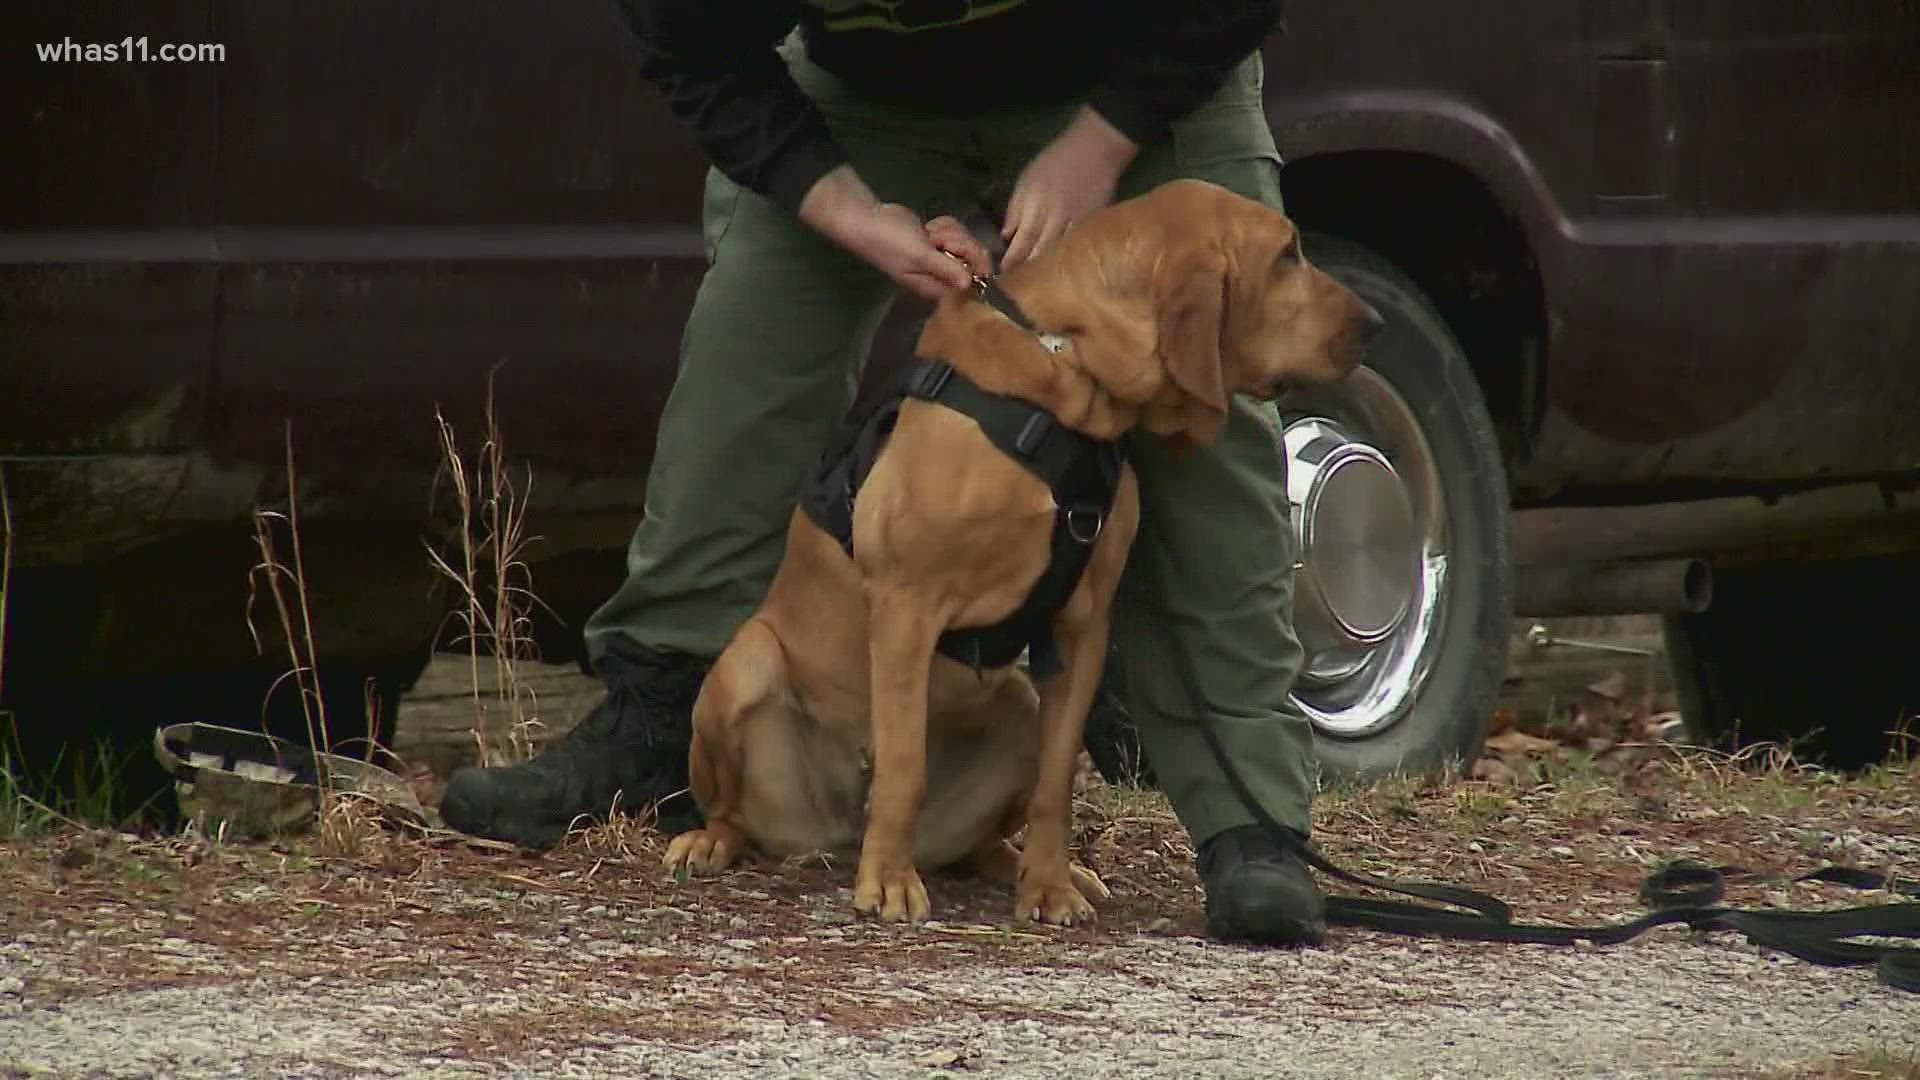 Dogs and handlers come to Grayson County, Kentucky each year for a training session to help them solve high-profile crimes.